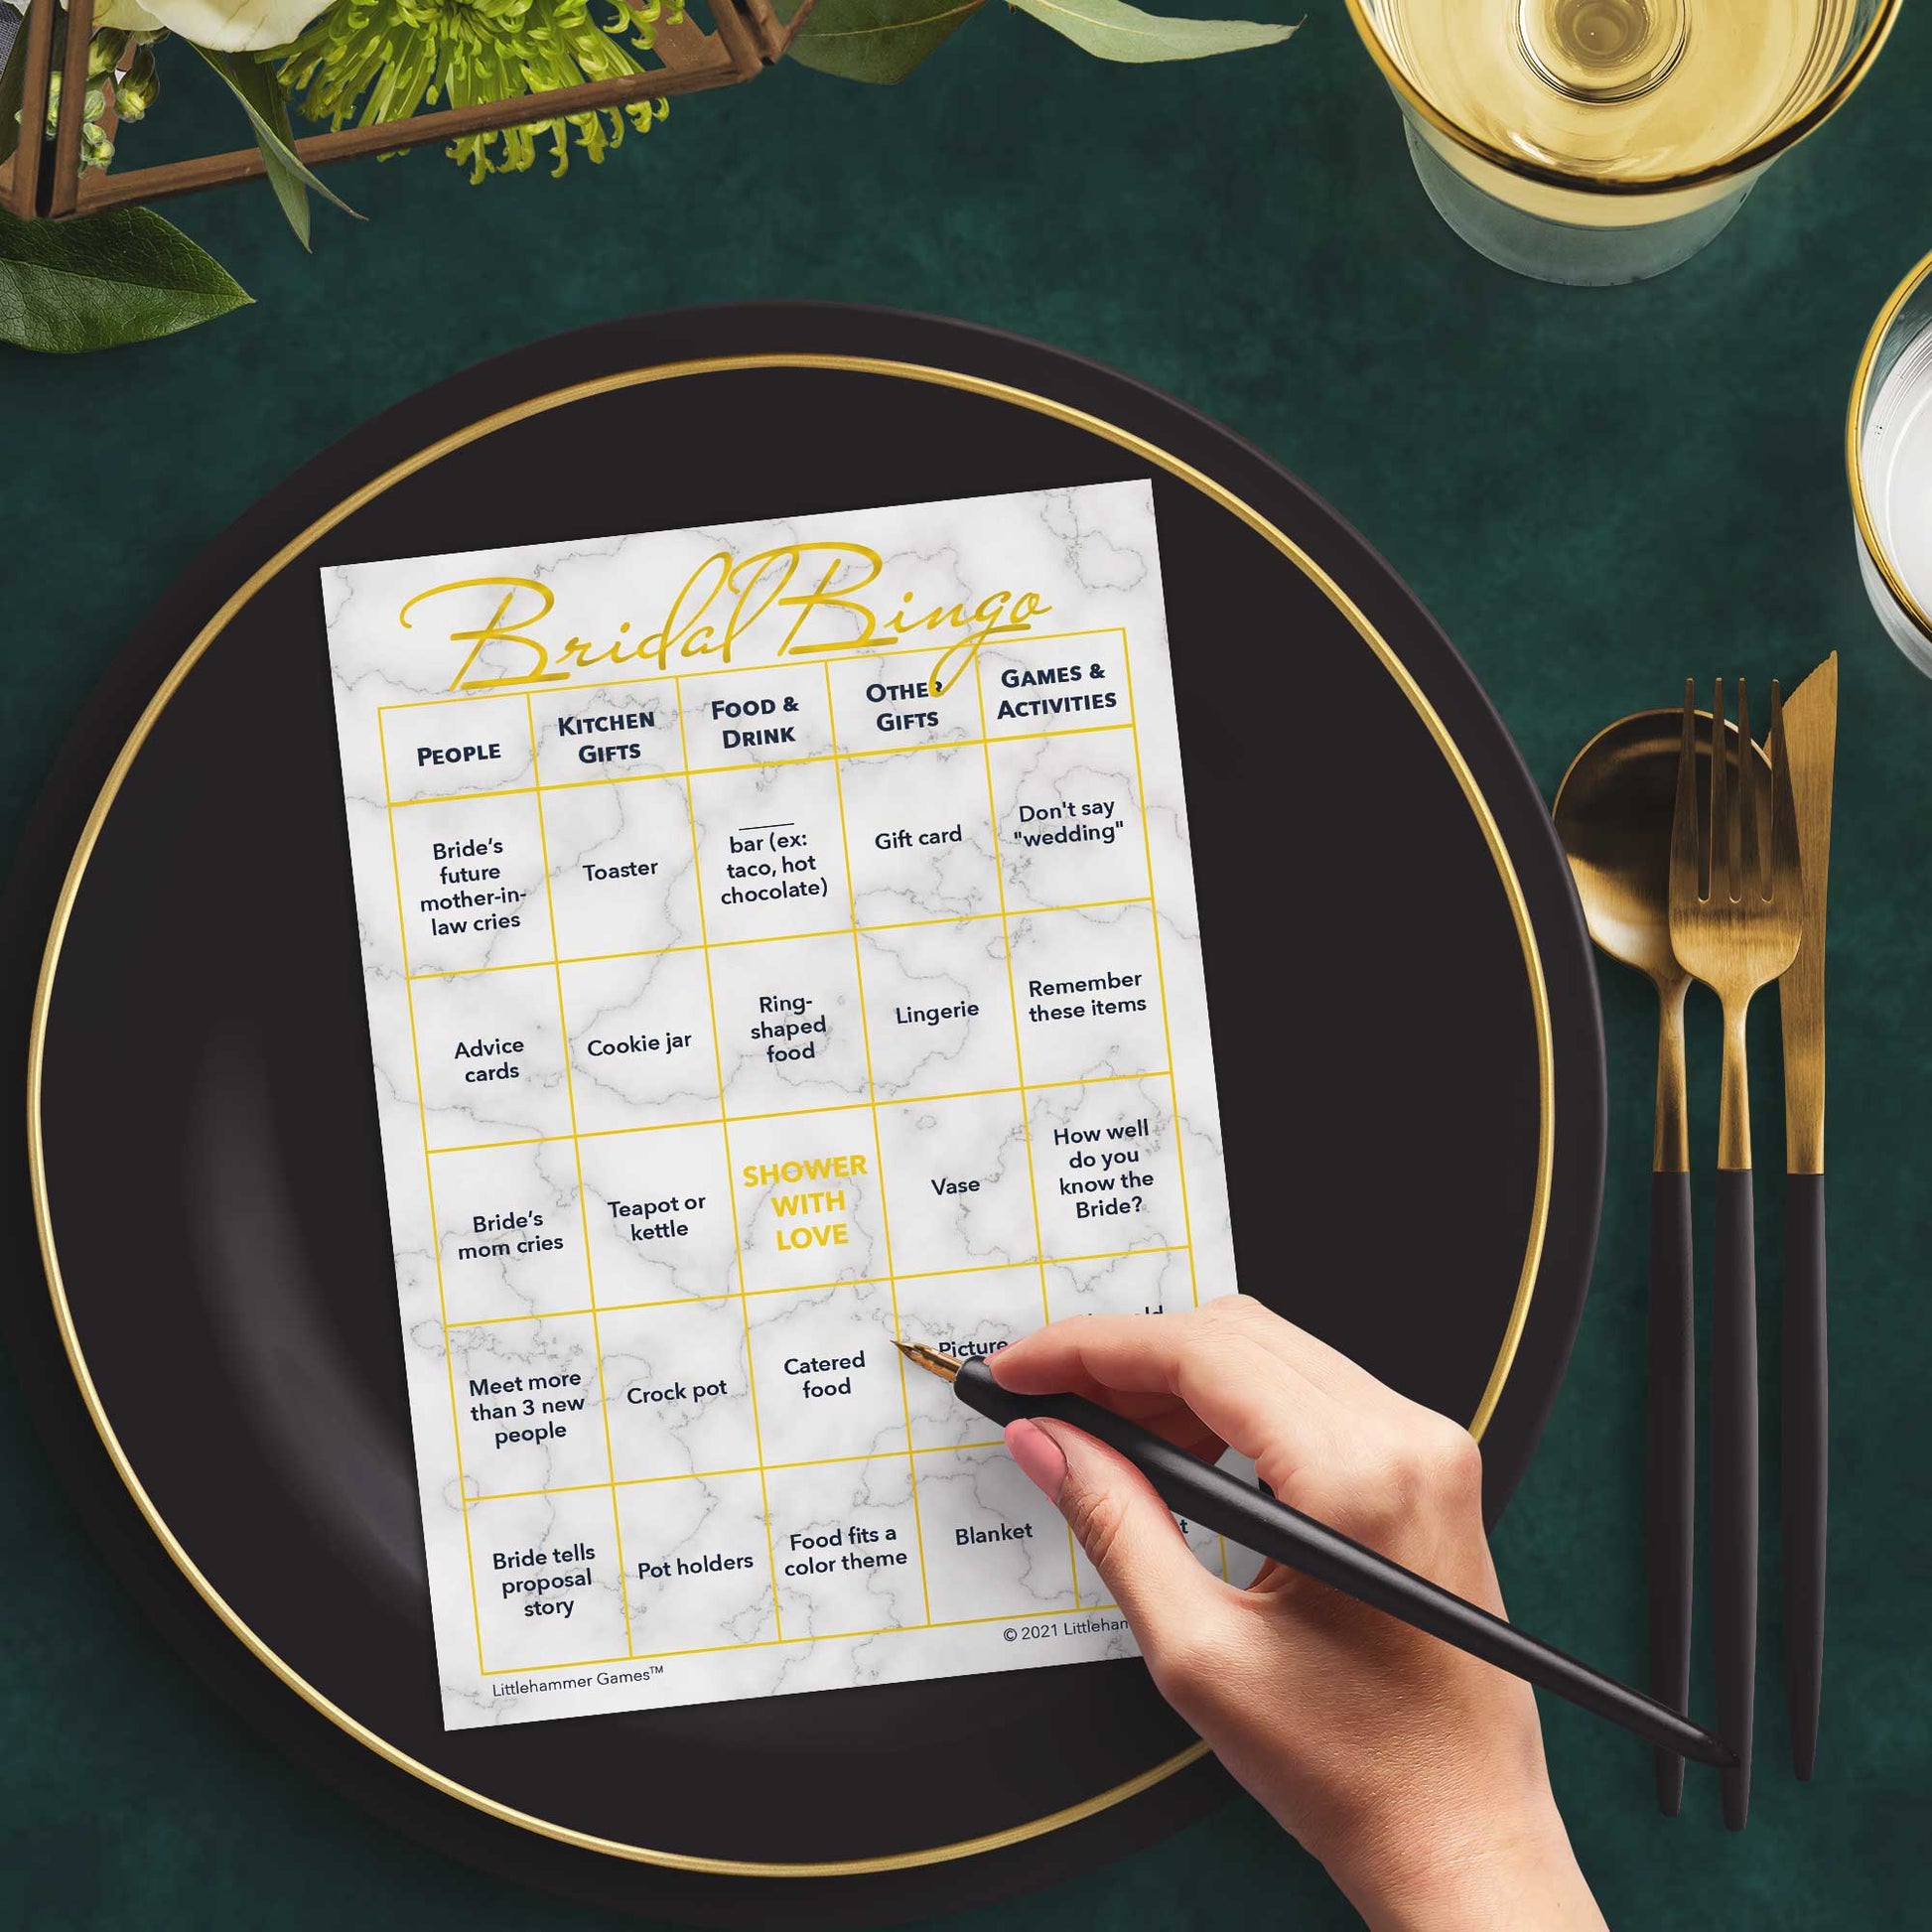 Woman with a pen sitting at a table with a gold and marble Bridal Bingo game card on a black and gold plate at a dark place setting